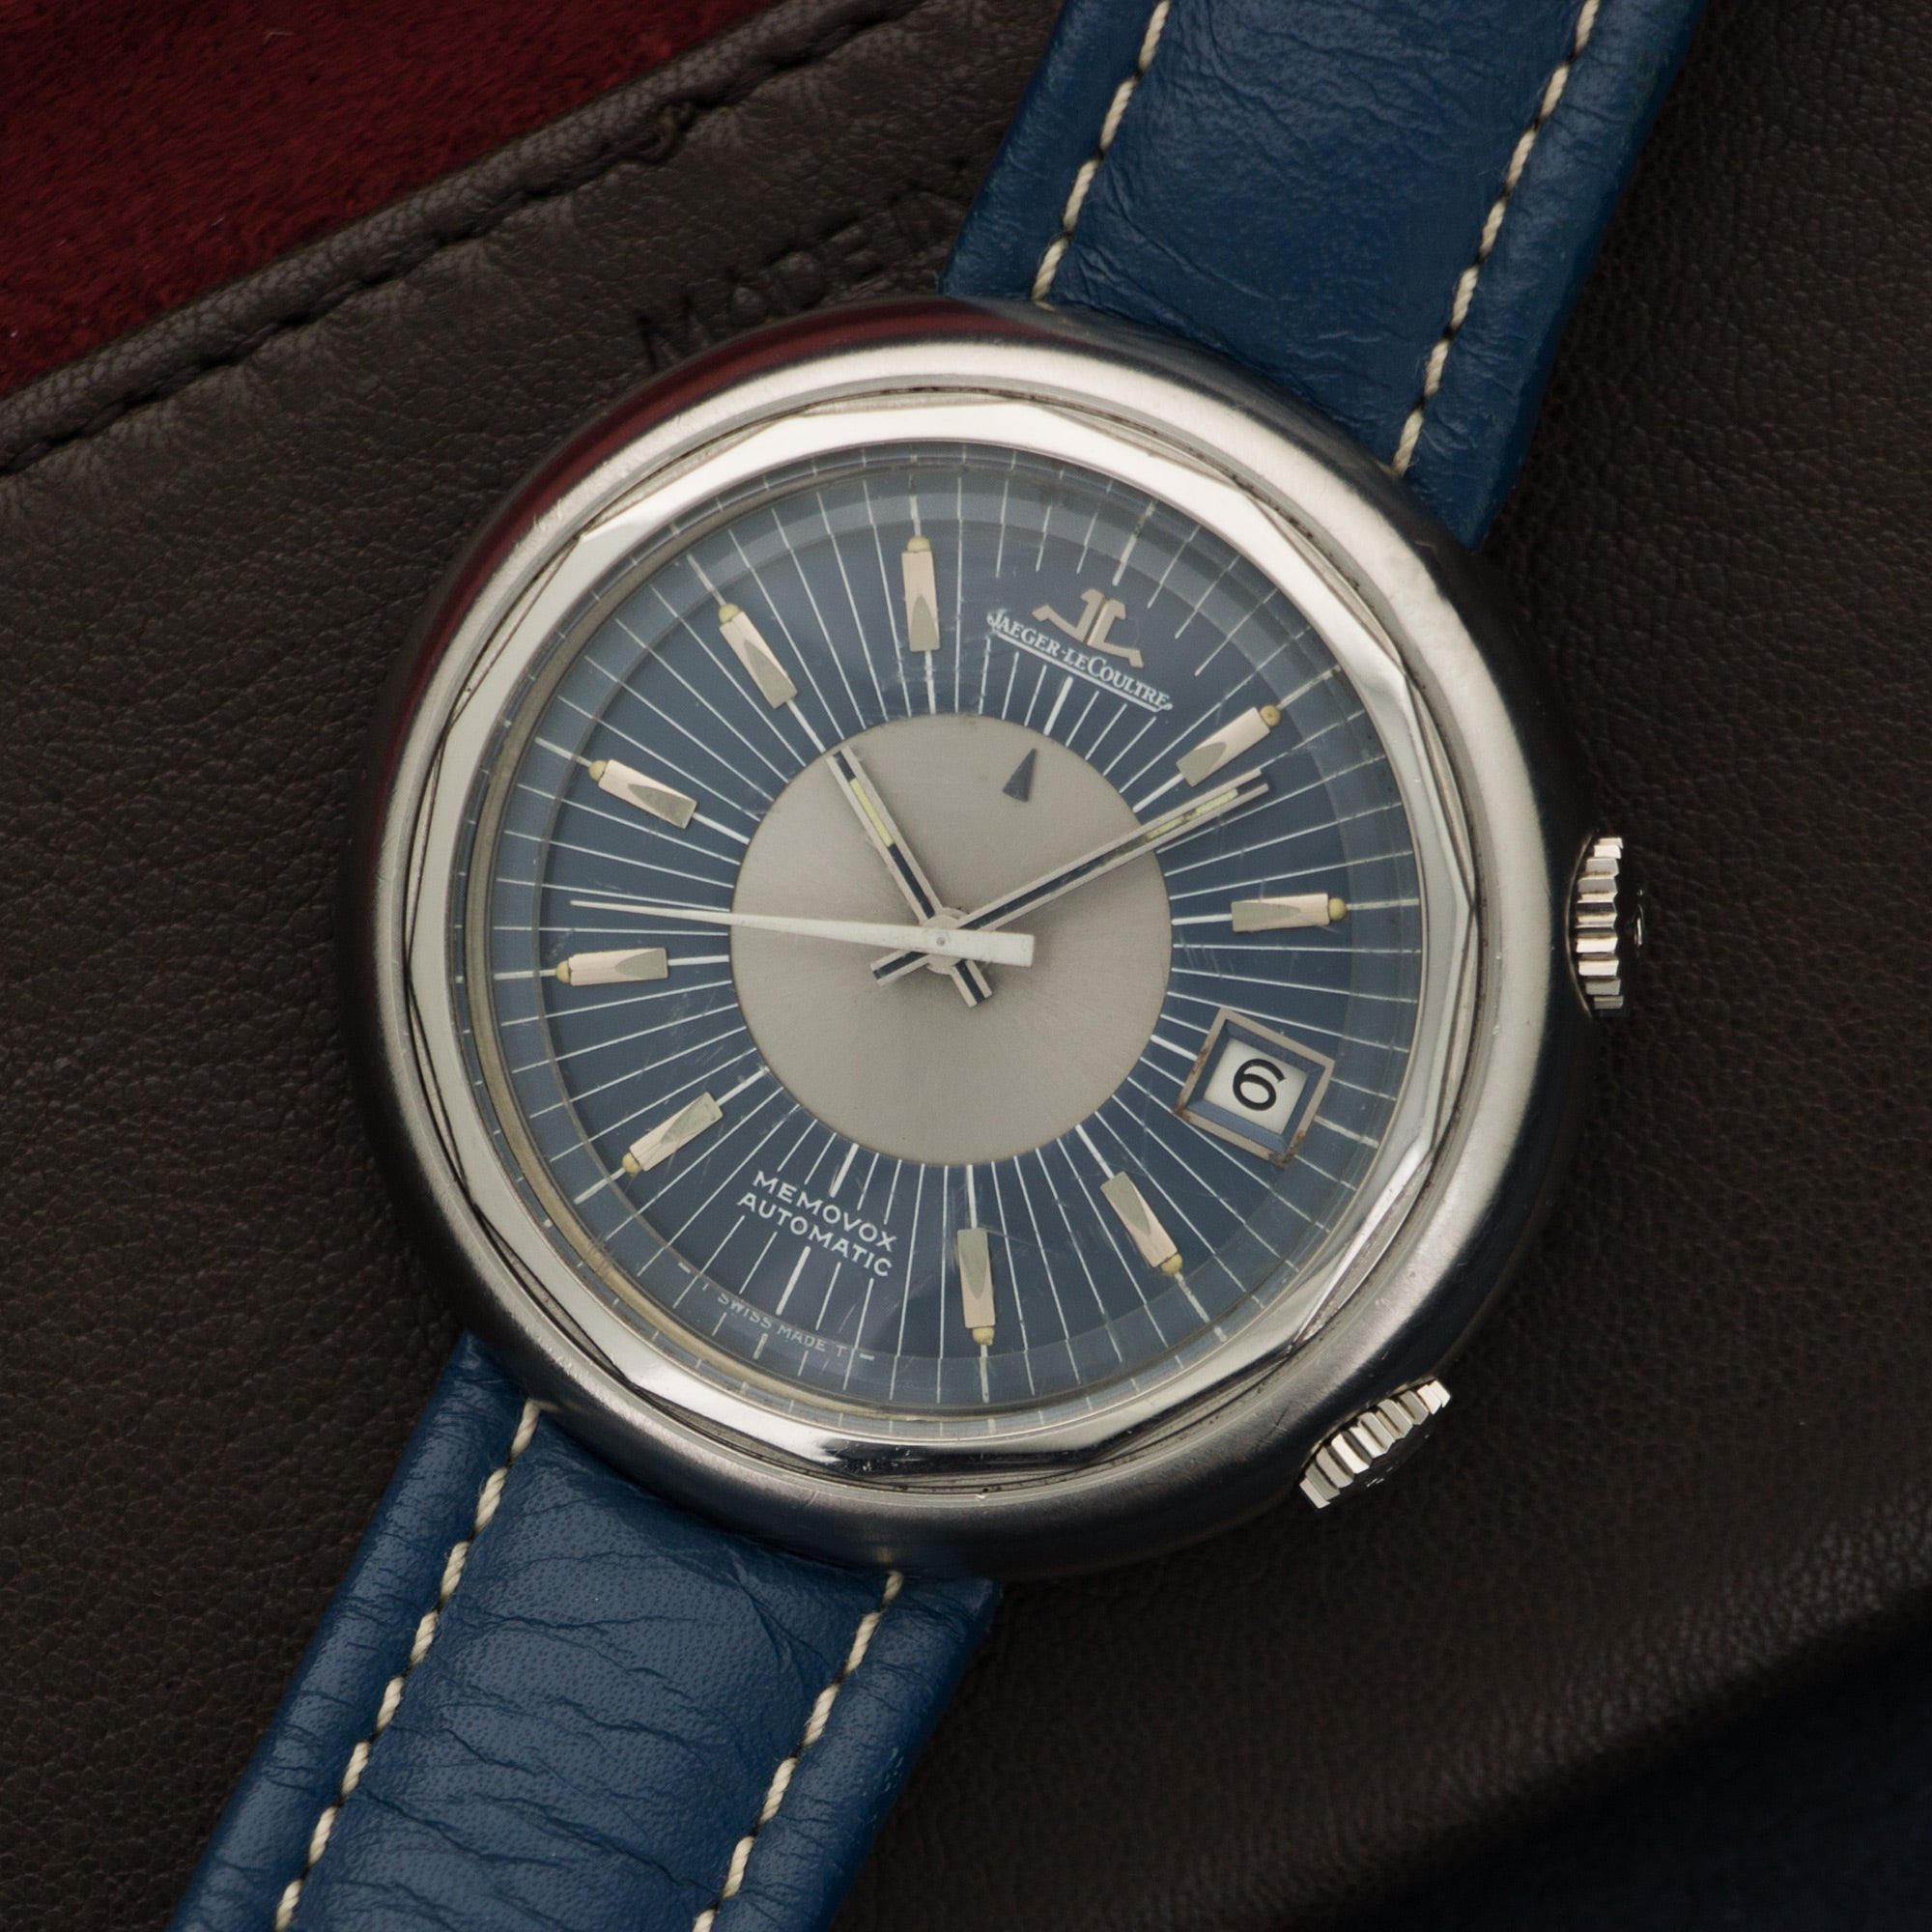 Jaeger LeCoultre - Jaeger Lecoultre Steel Memovox Snowdrop Watch Ref. E877 - The Keystone Watches